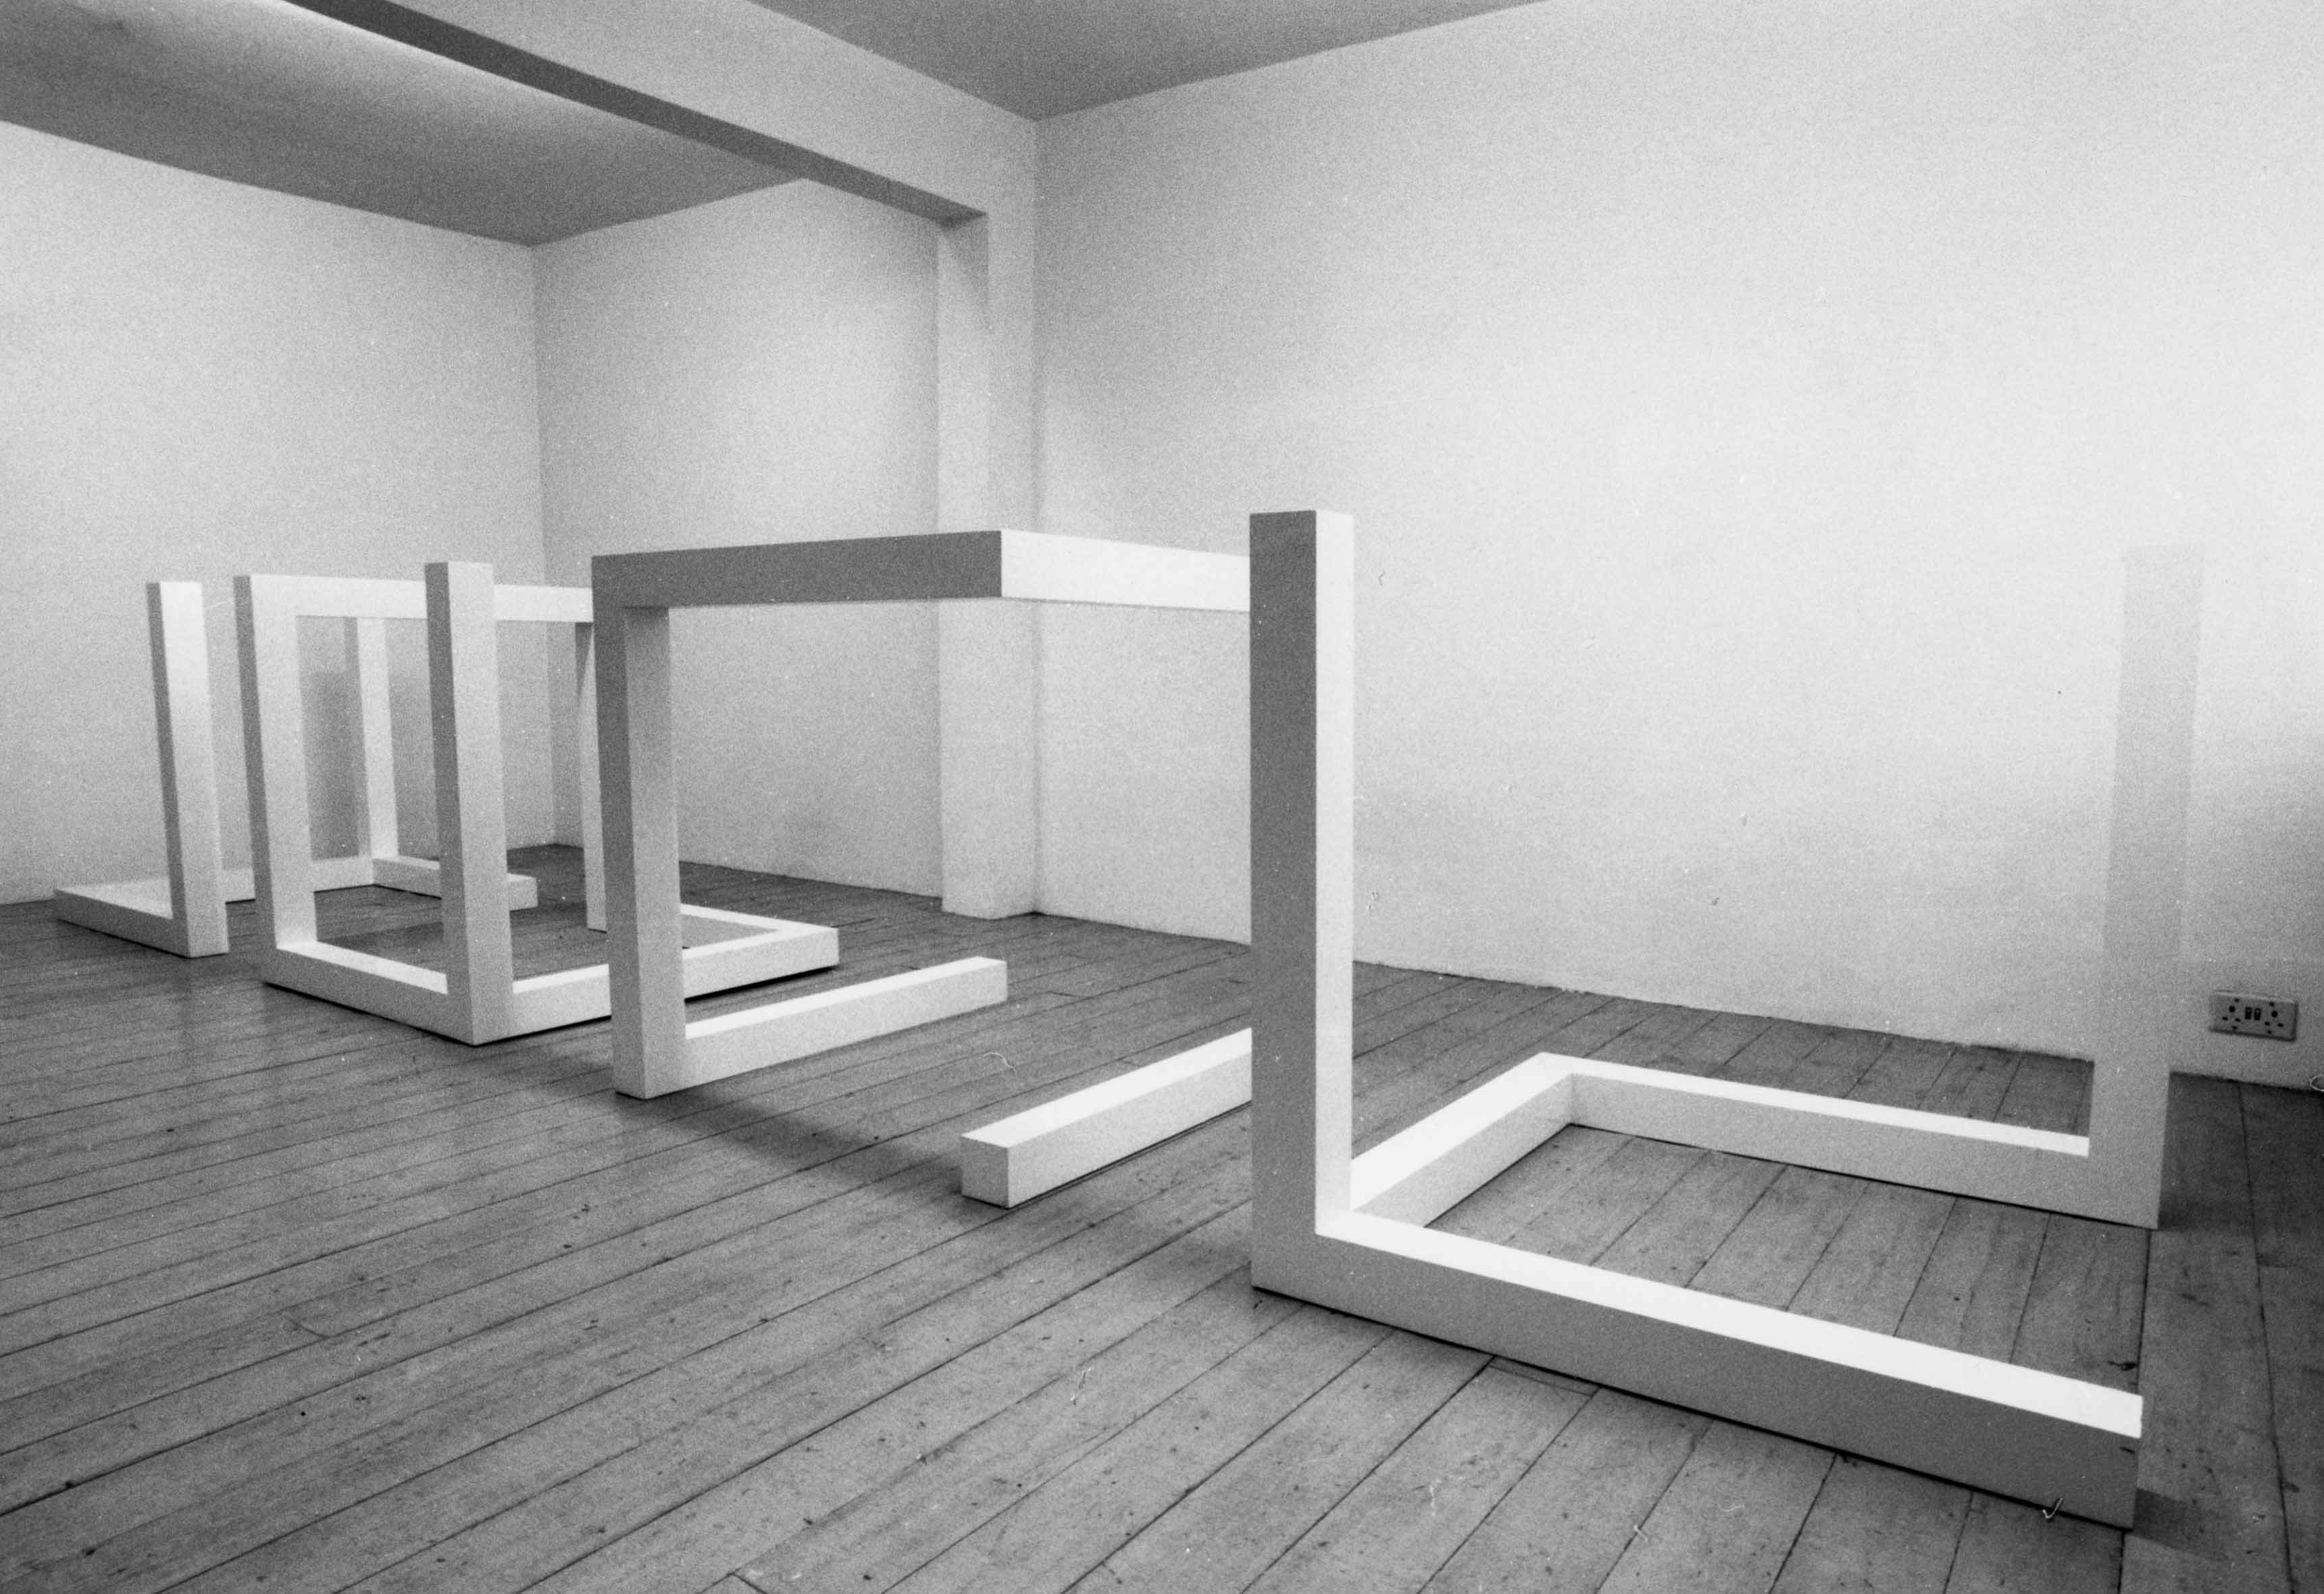 “New Works - Structures & early working drawings” (1977) by Sol Lewitt, Lisson Gallery